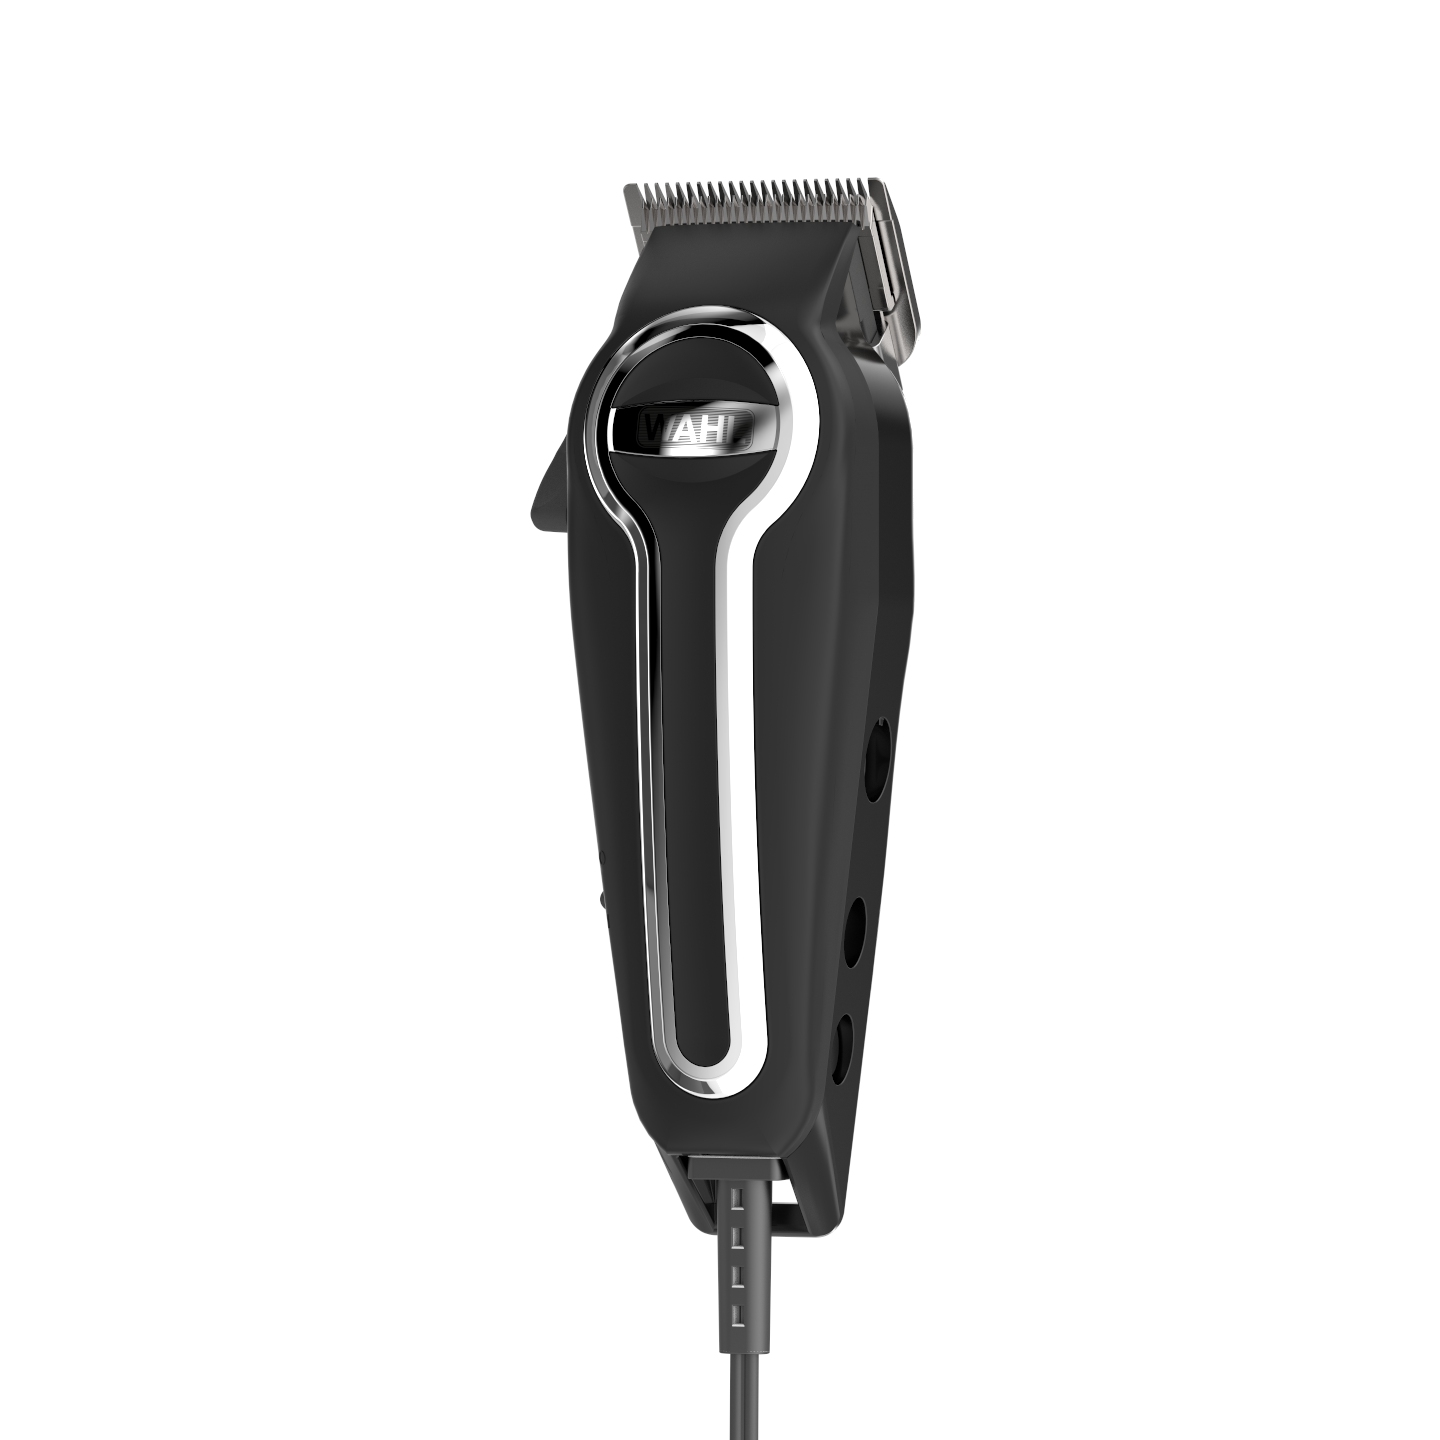 wahl elite pro clippers uk